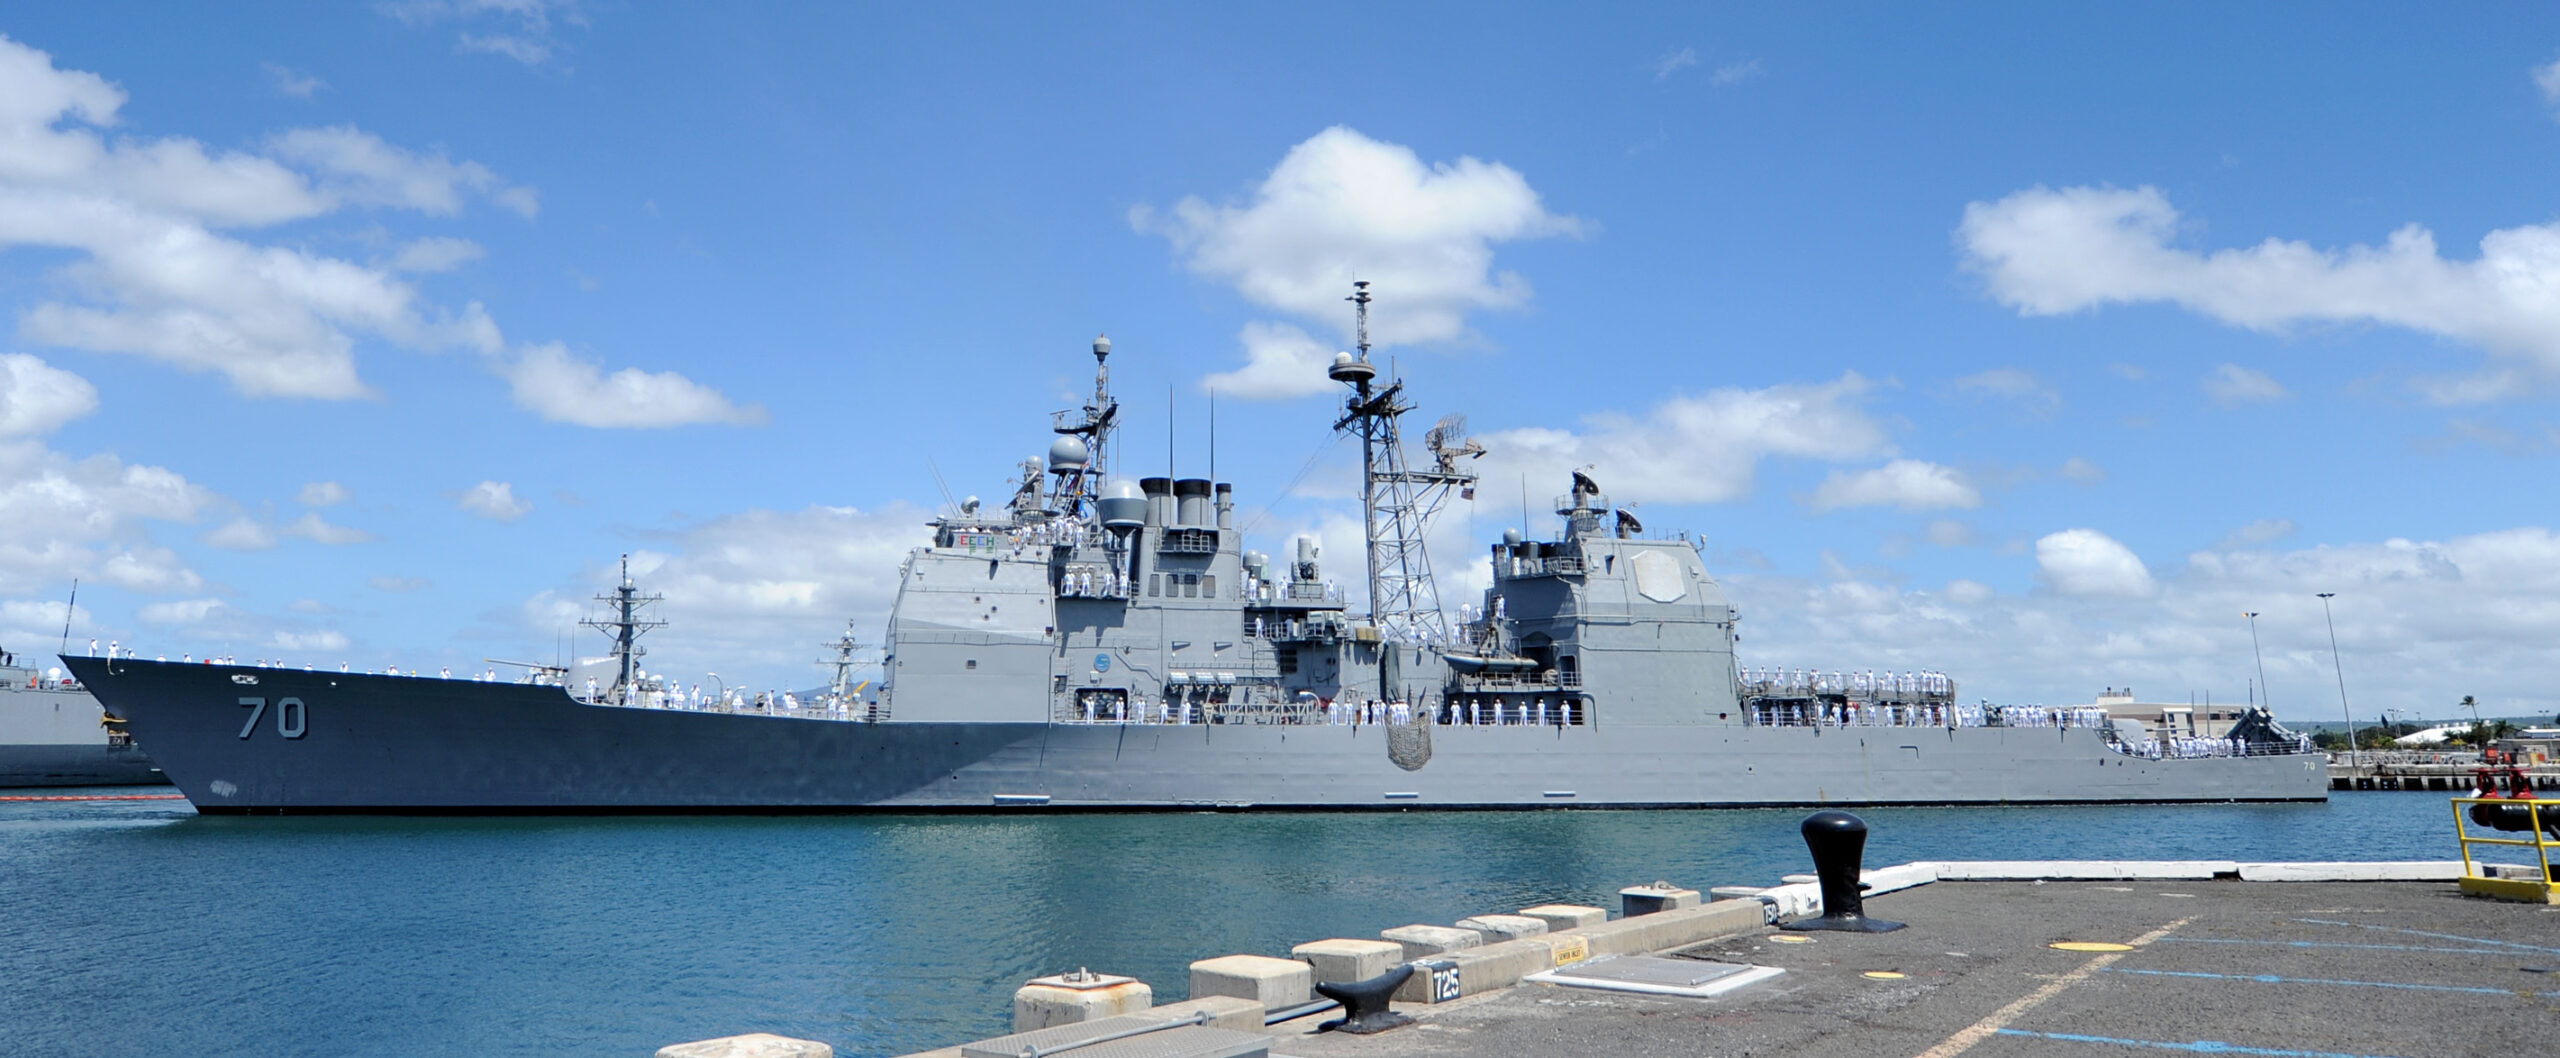 The guided missile cruiser USS Lake Erie (CG 70) returns to Joint Base Pearl Harbor-Hickam Hawaii, June 16, 2014, from a four-month deployment. (U.S. Navy photo by Mass Communication Specialist 2nd Class Tiarra Fulgham/Released)